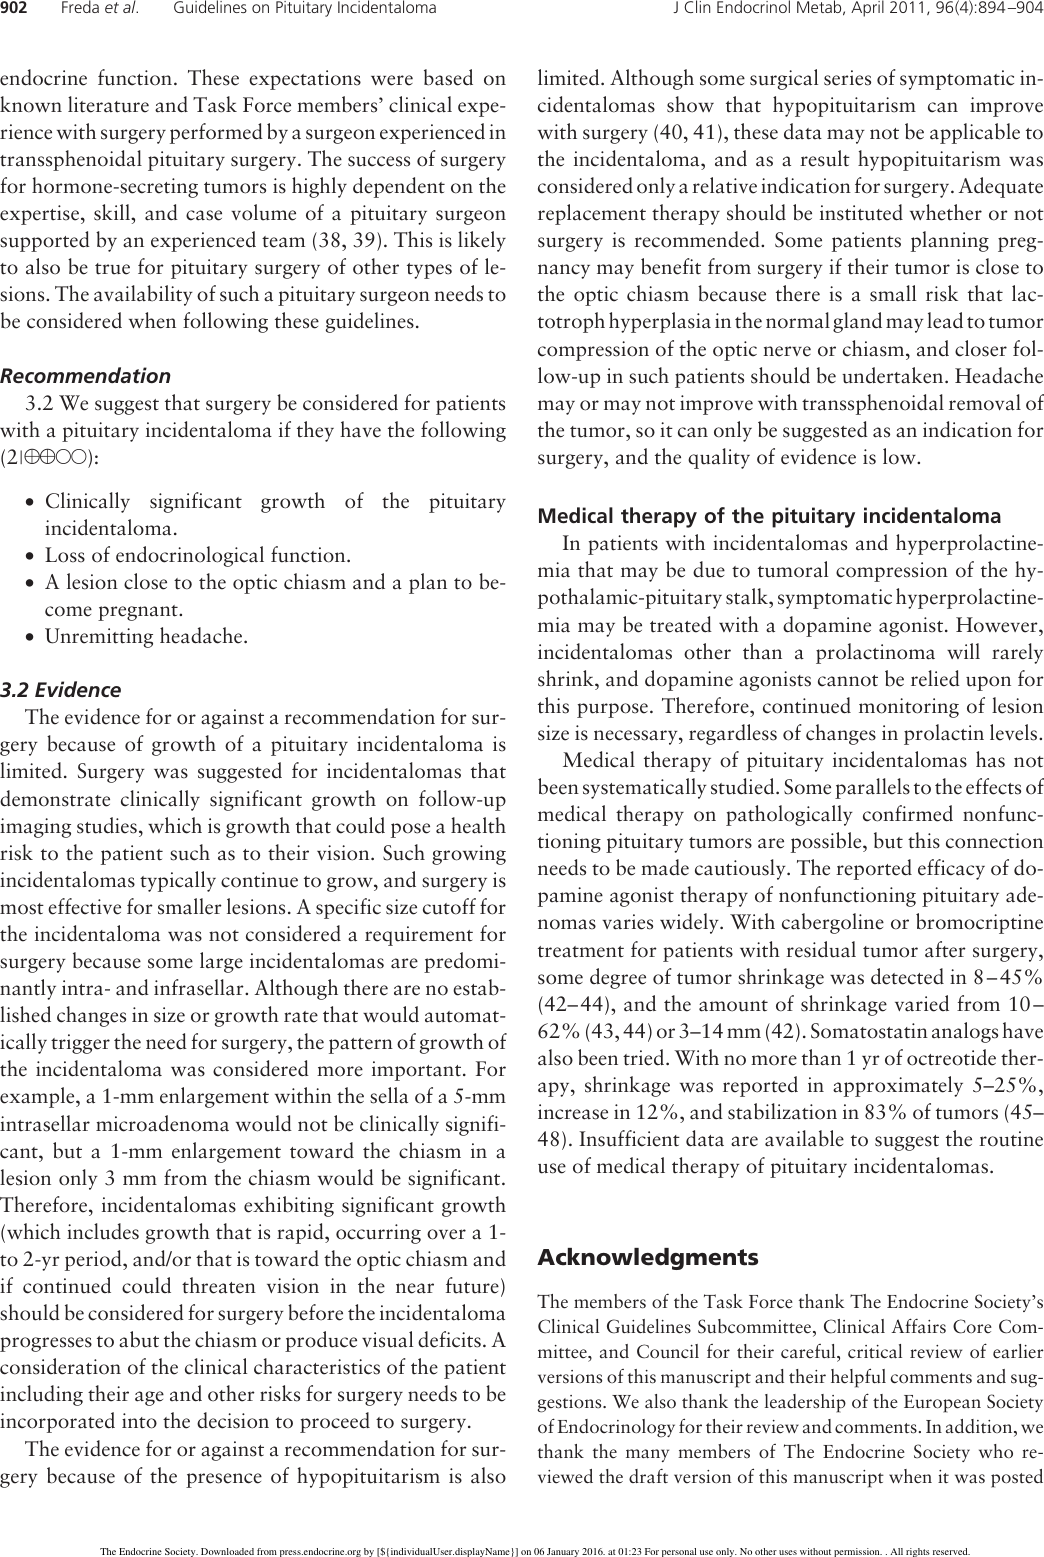 Page 9 of 11 - Pituitary Incidentaloma: An Endocrine Society Clinical Practice Guideline Incidentaloma Guide 2011